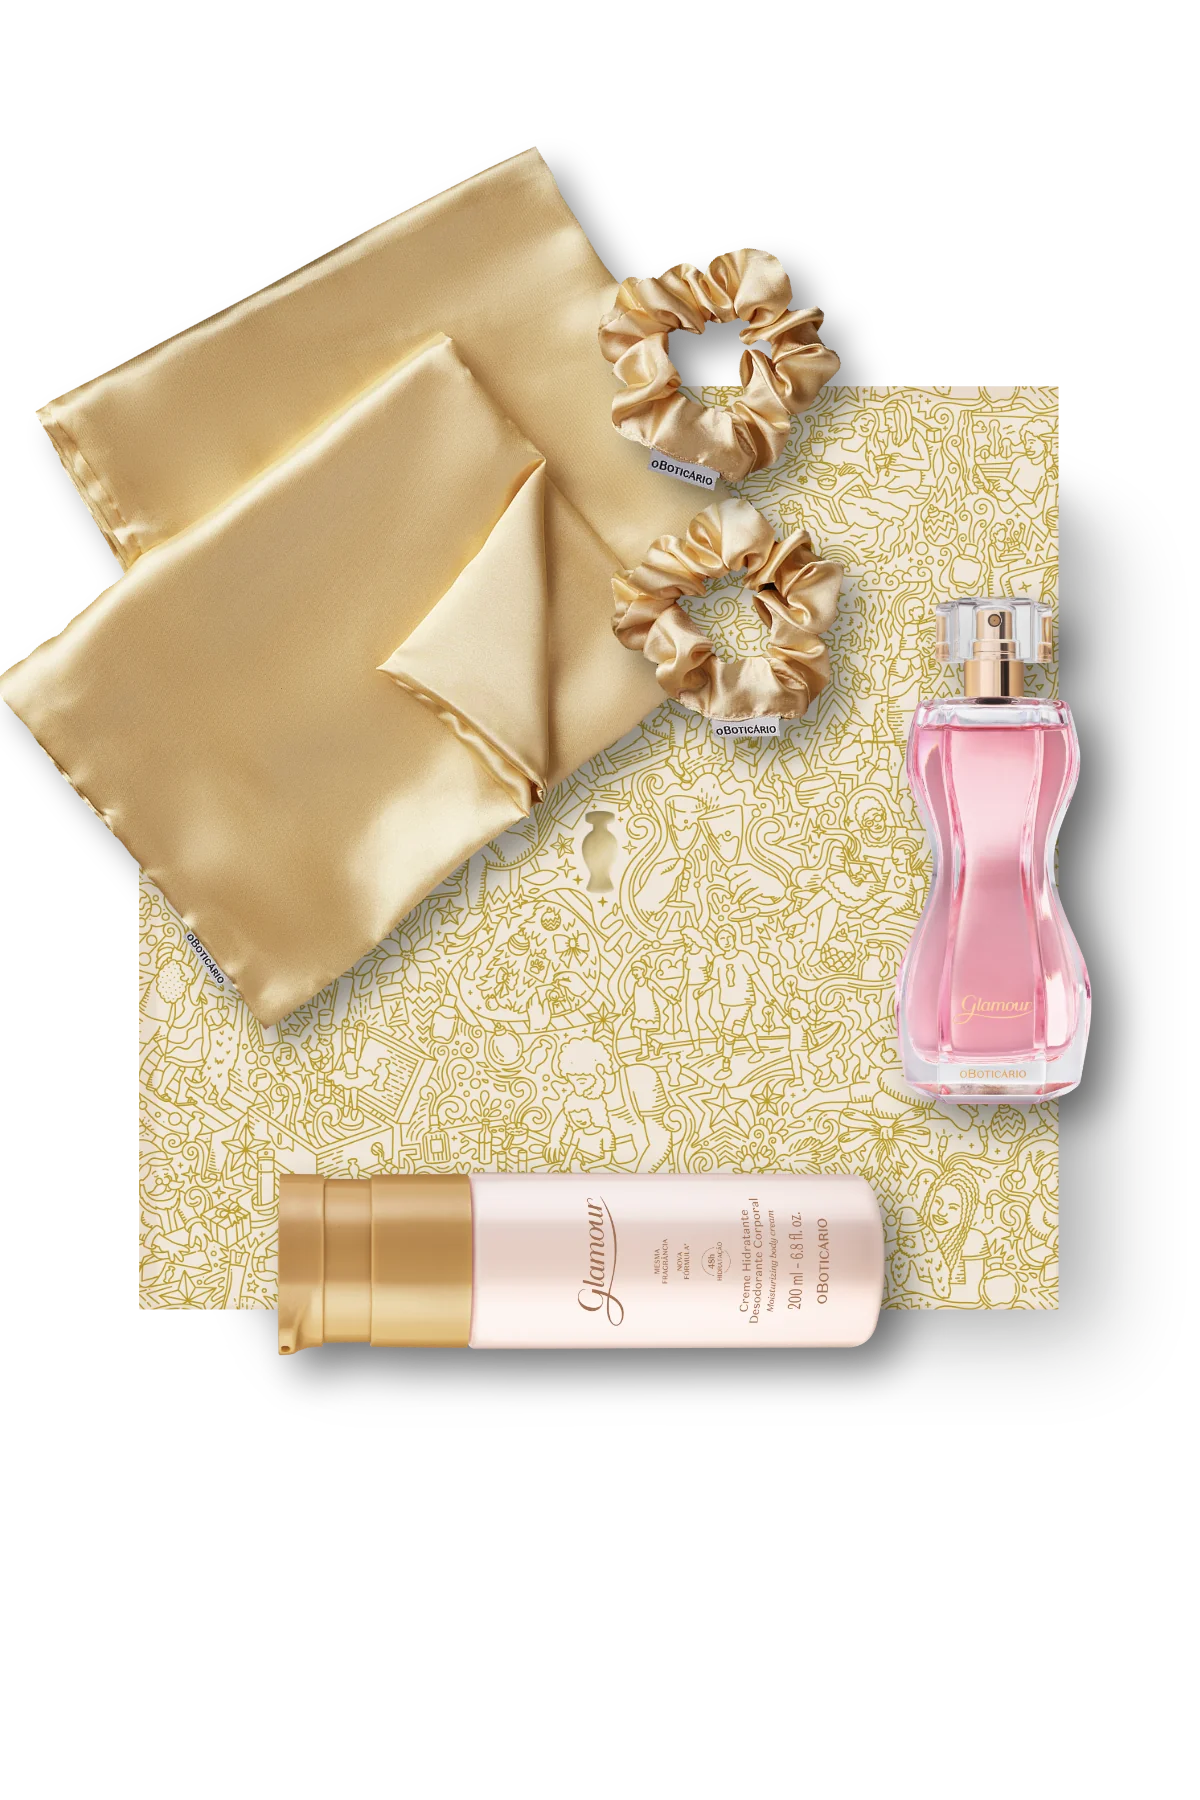 Glamour Holiday Gift Set: 75ml Fragrance, 200ml Body Lotion w/ 2 Satin Pillow Cases & Scrunchies